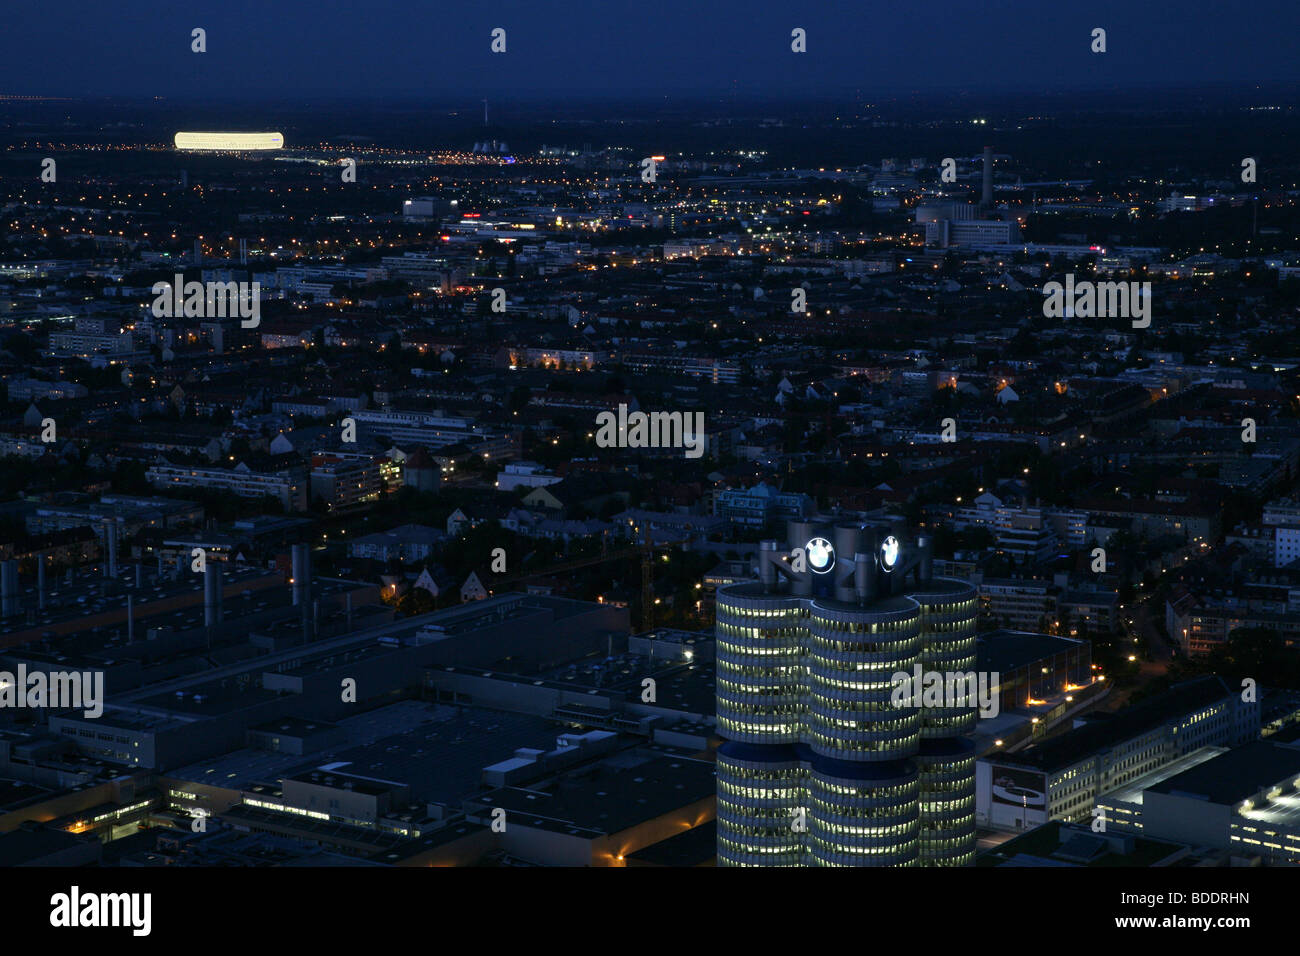 The BMW headquarters building and in the distance the FC Bayern football stadium at night. Munich, Germany. Stock Photo